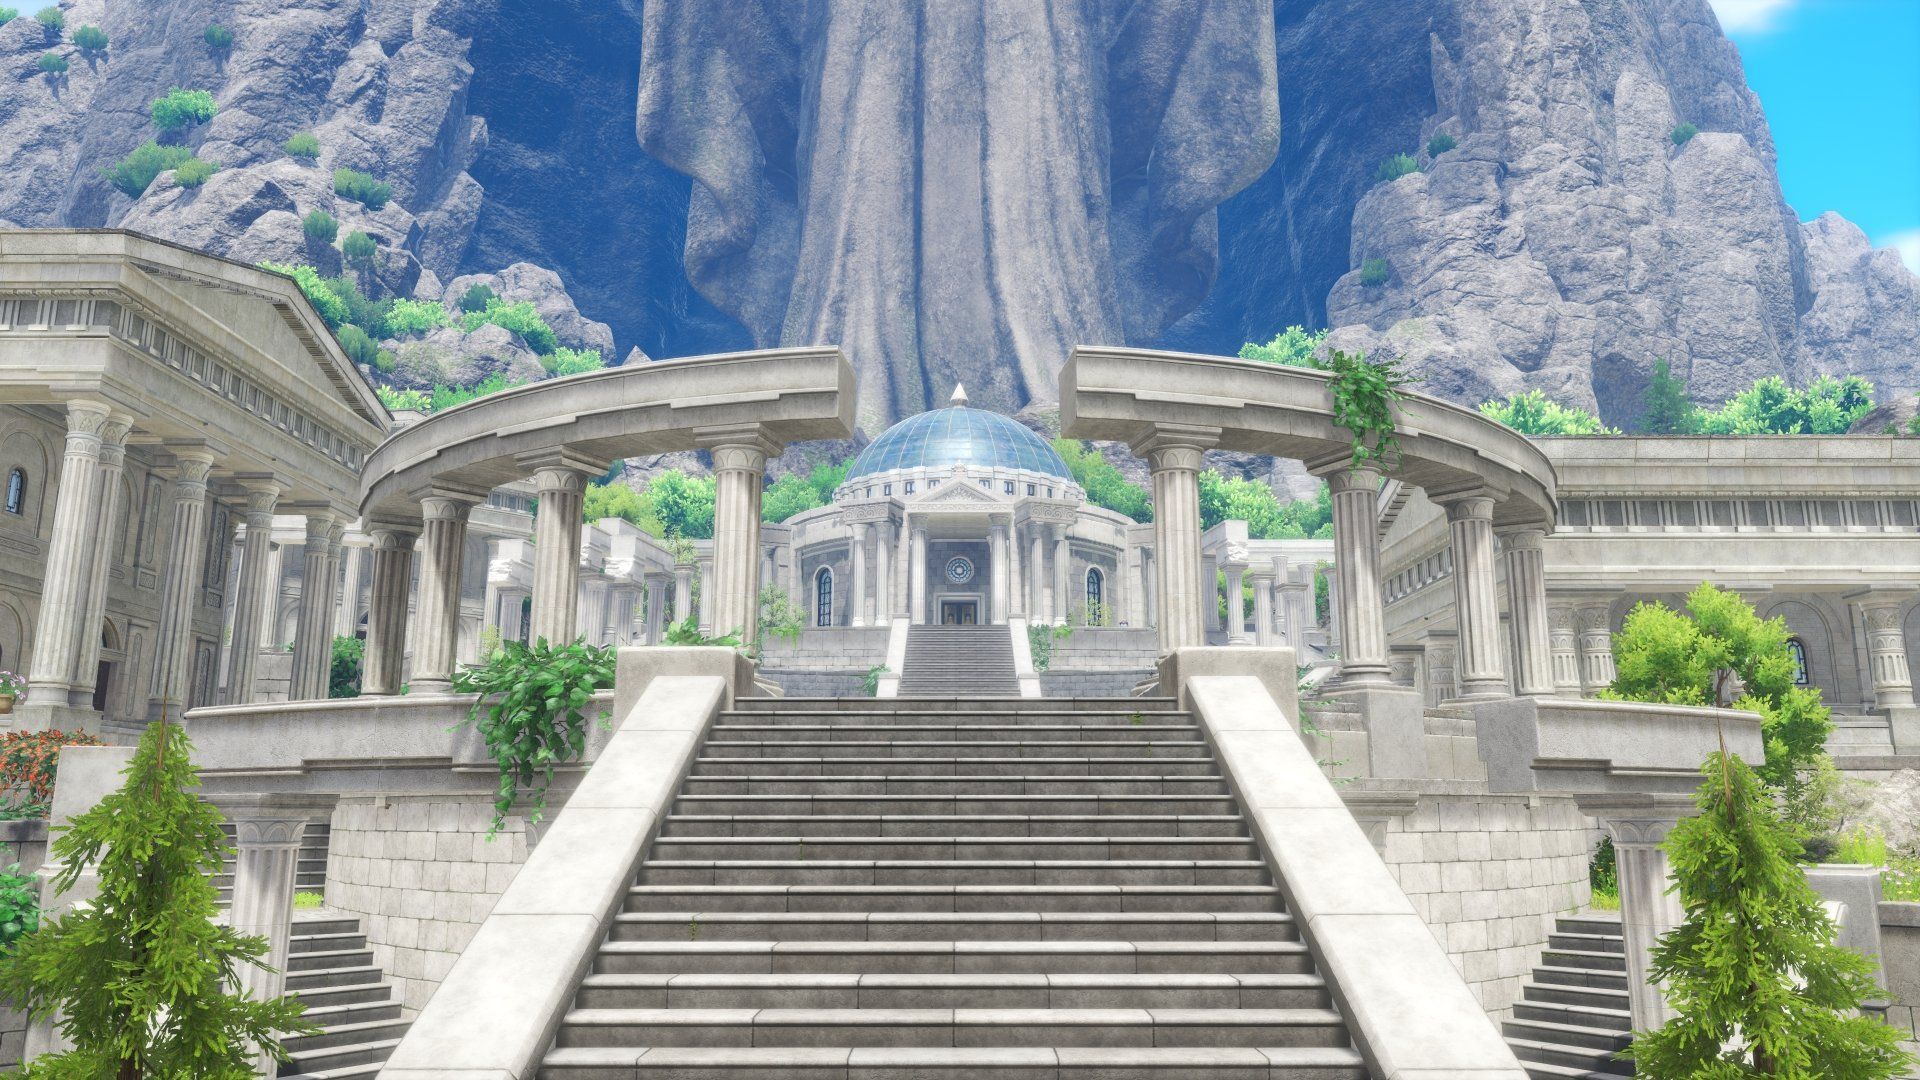 DRAGON QUEST XI Echoes of an Elusive Age Video Game Dragon Quest XI Wallpaper. Dragon quest, Background image